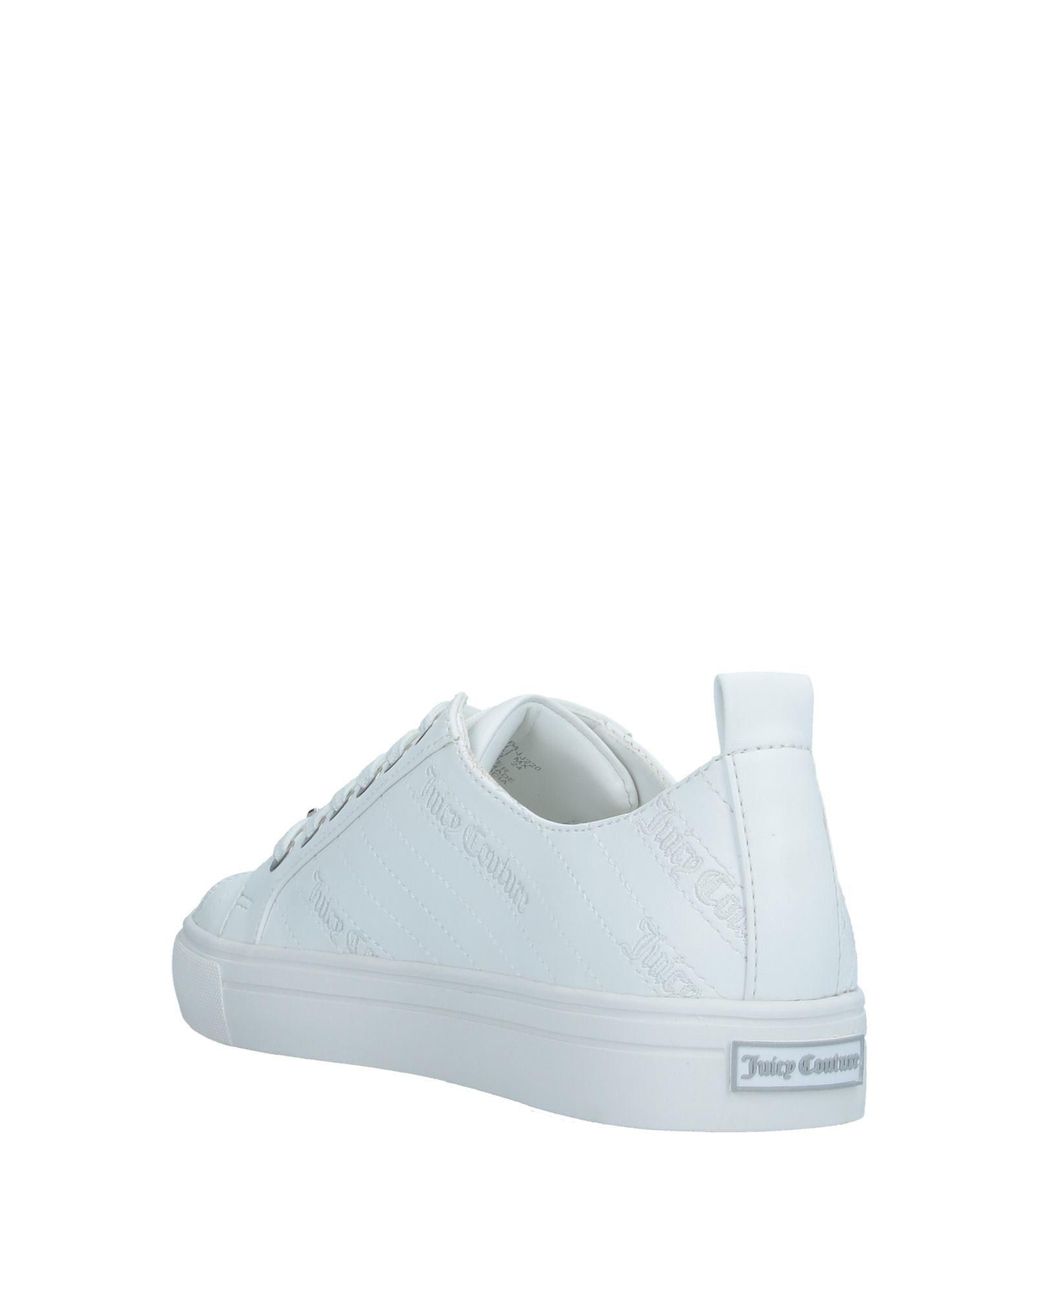 Juicy Couture Multi Color Sneakers | Juicy couture, Sneakers, Couture